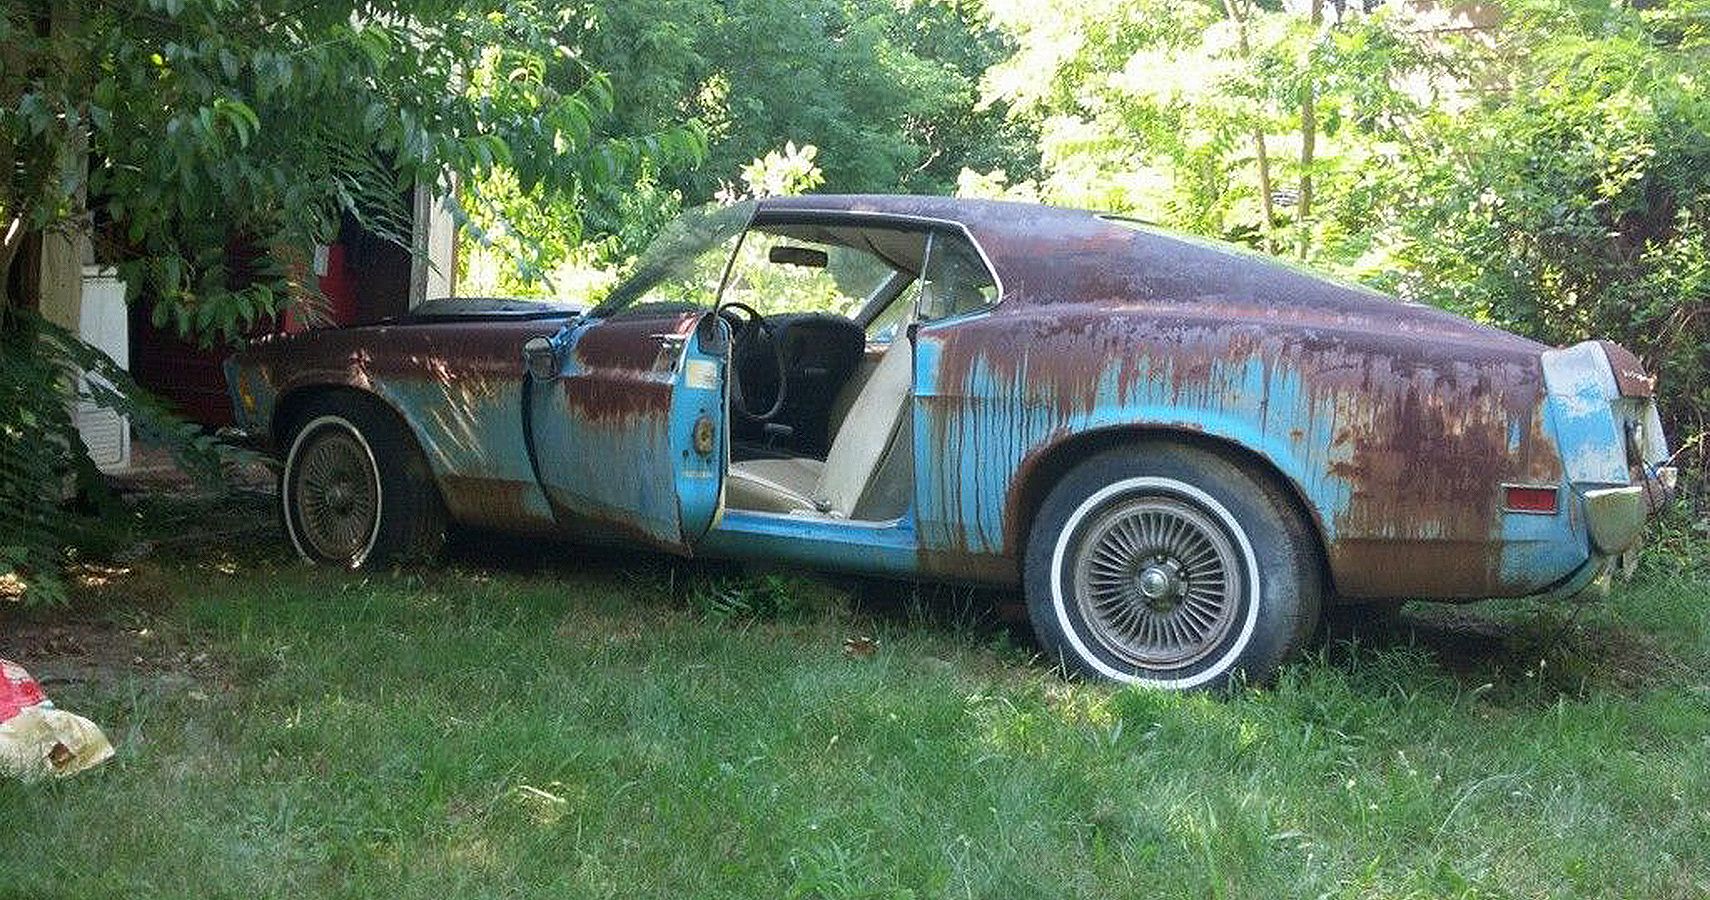 1970 Ford Mustang Boss 429: Less Than 500 Made, And Yet Abandoned